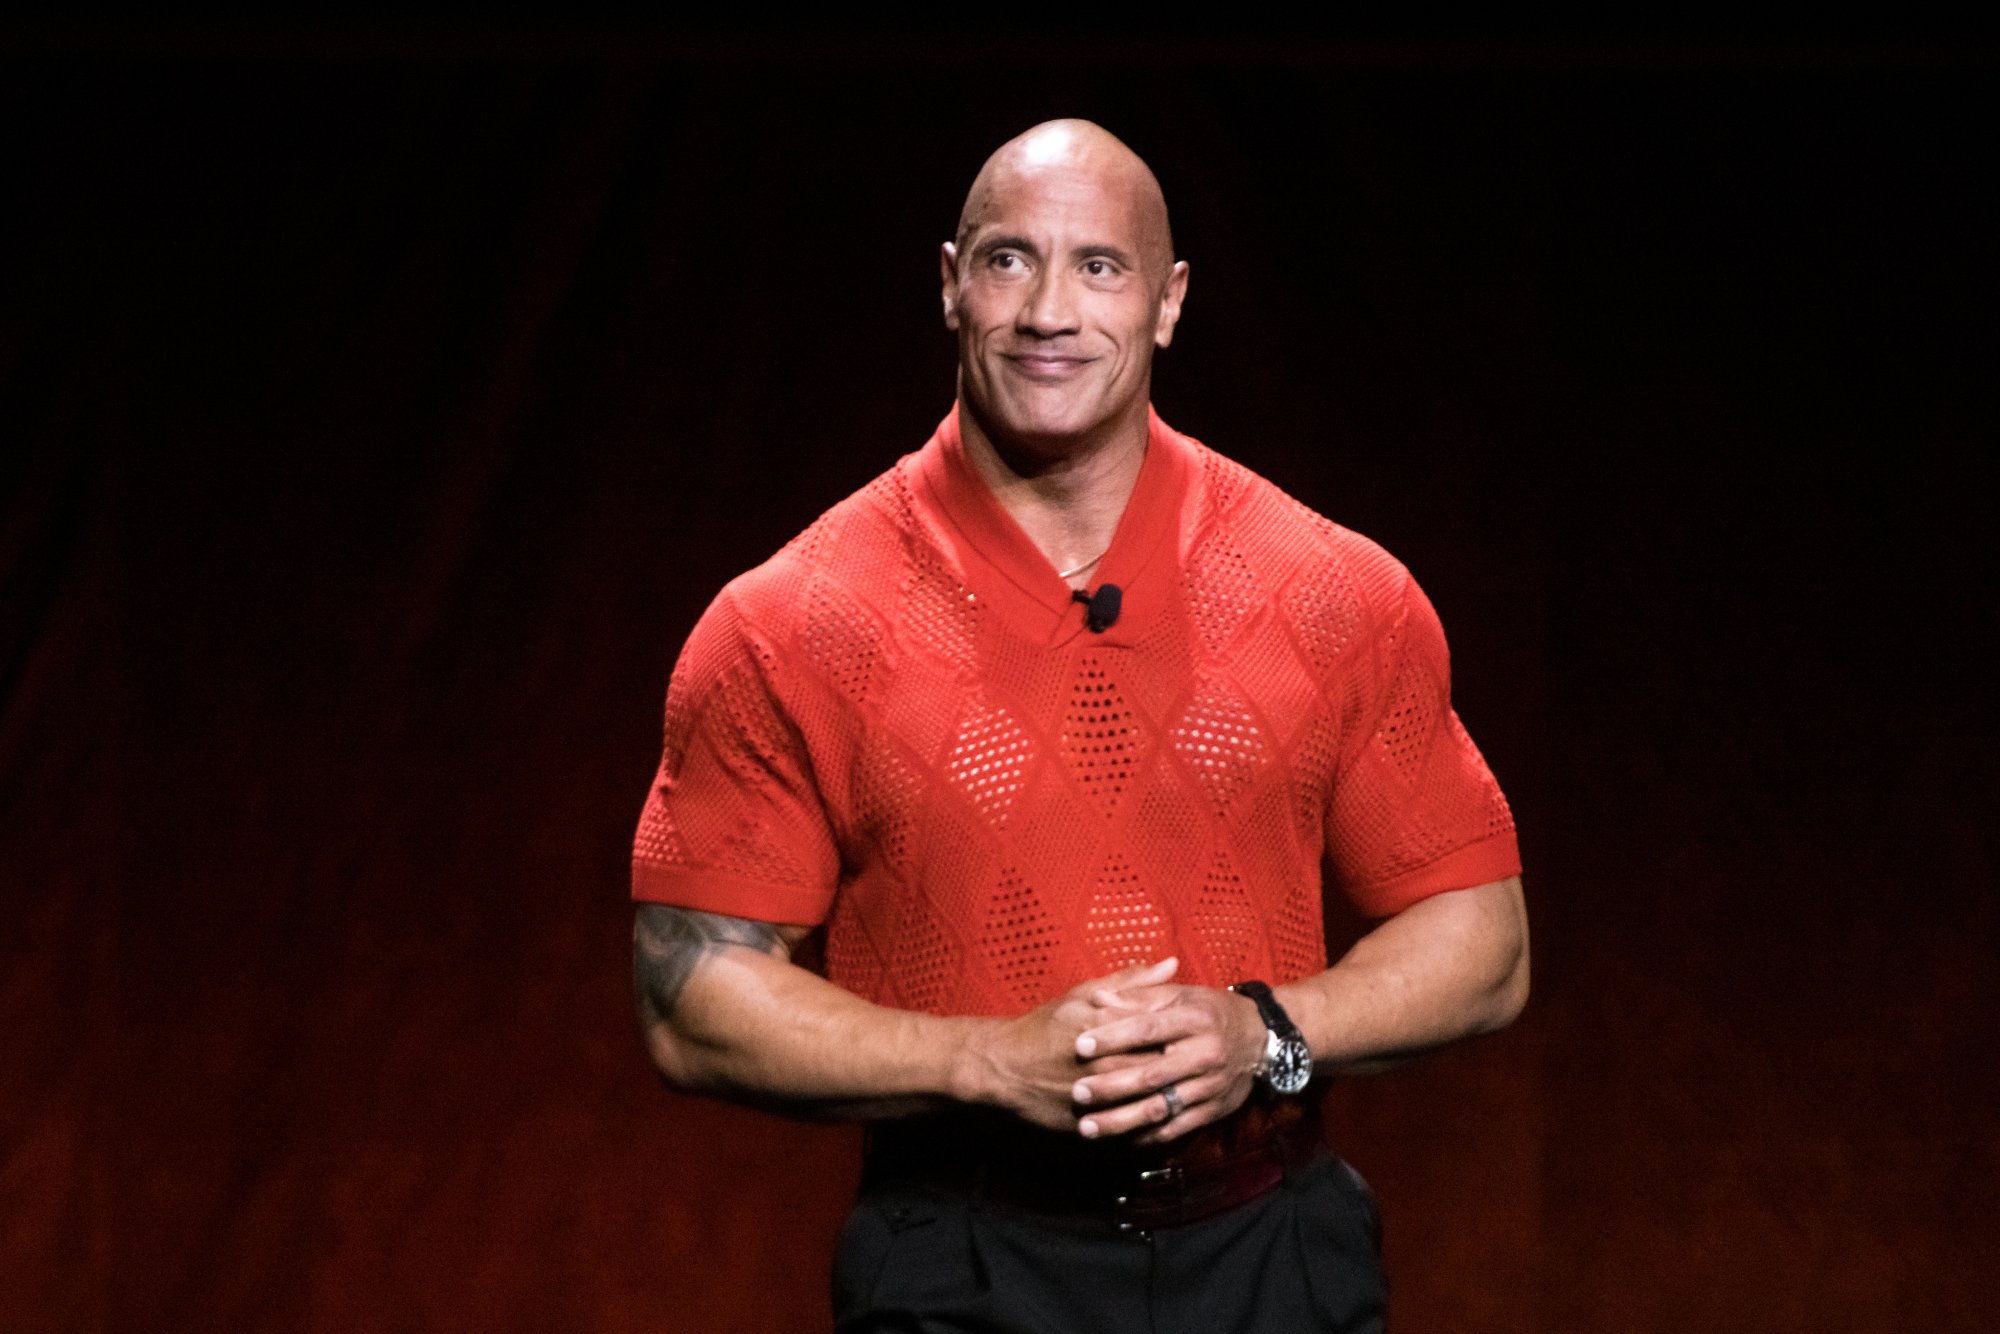 Dwayne Johnson, who has 3 kids, wearing a red shirt with his hands folded.